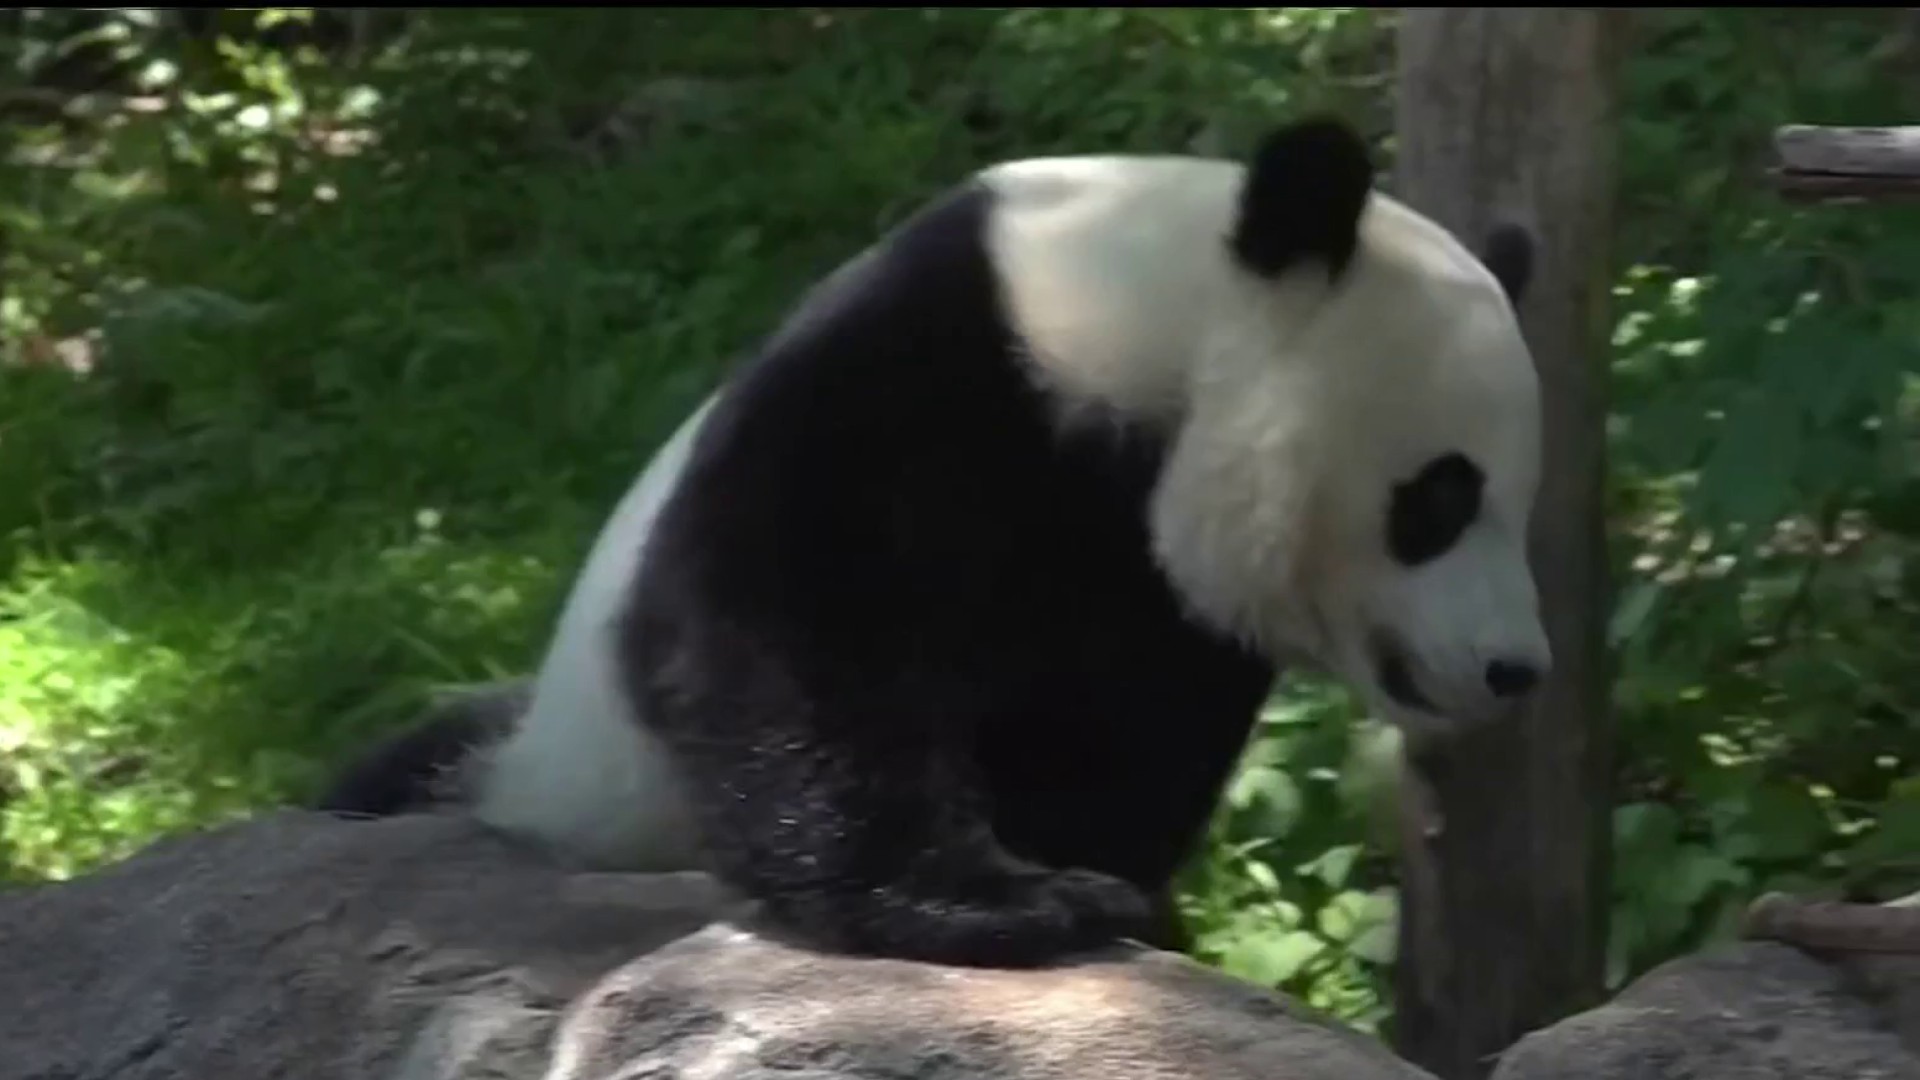 Are the giant pandas coming back to San Diego? Not if San